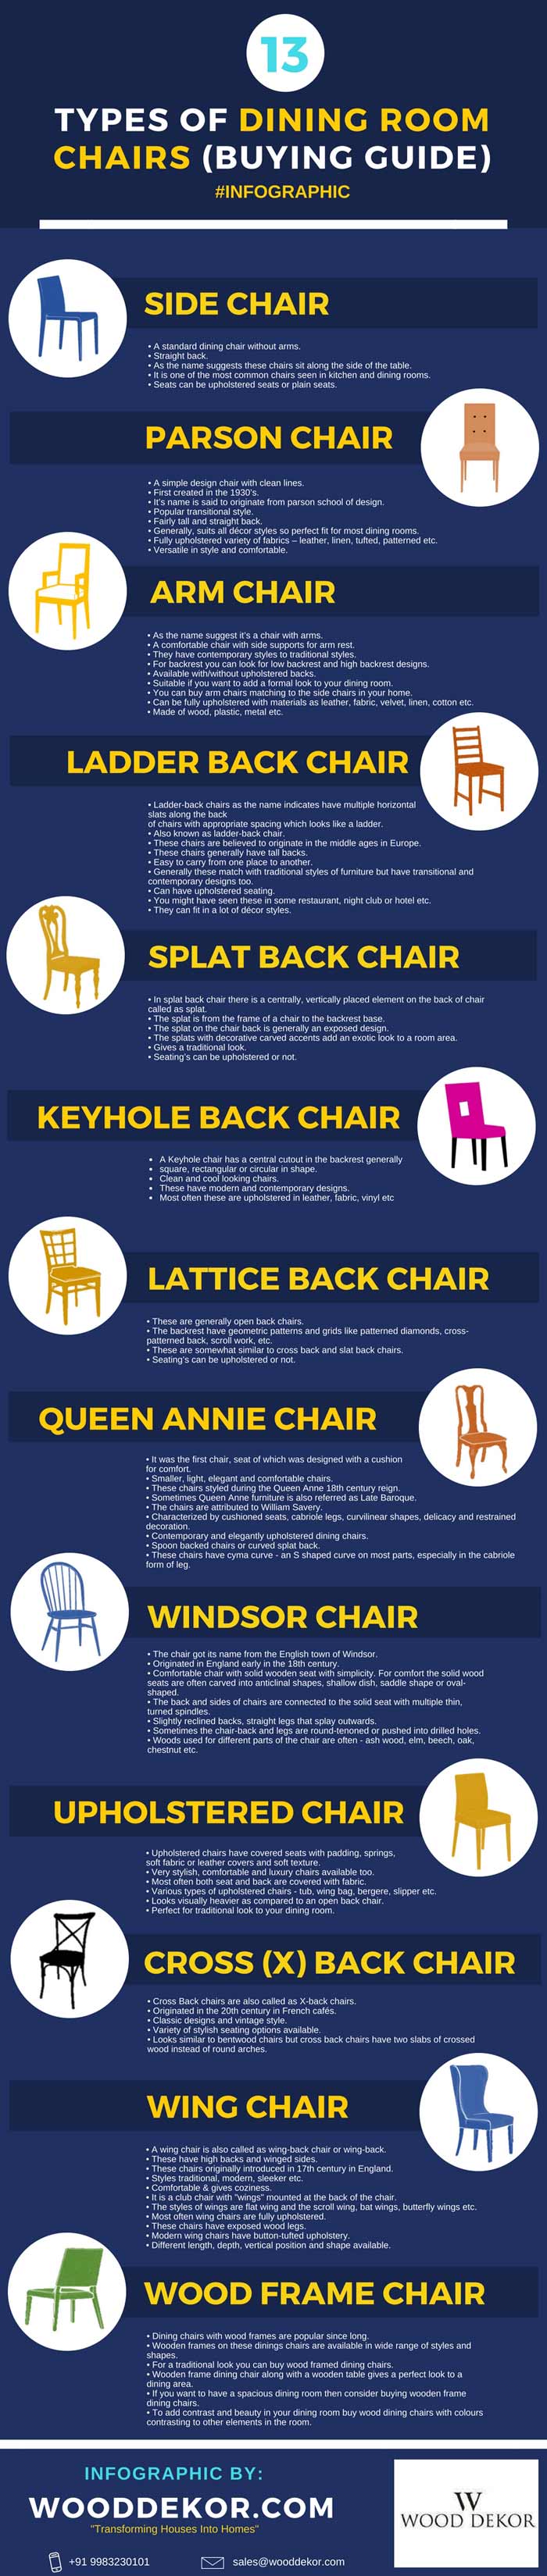 13 Types of Dining Chair Buying Guide [An Infographic]